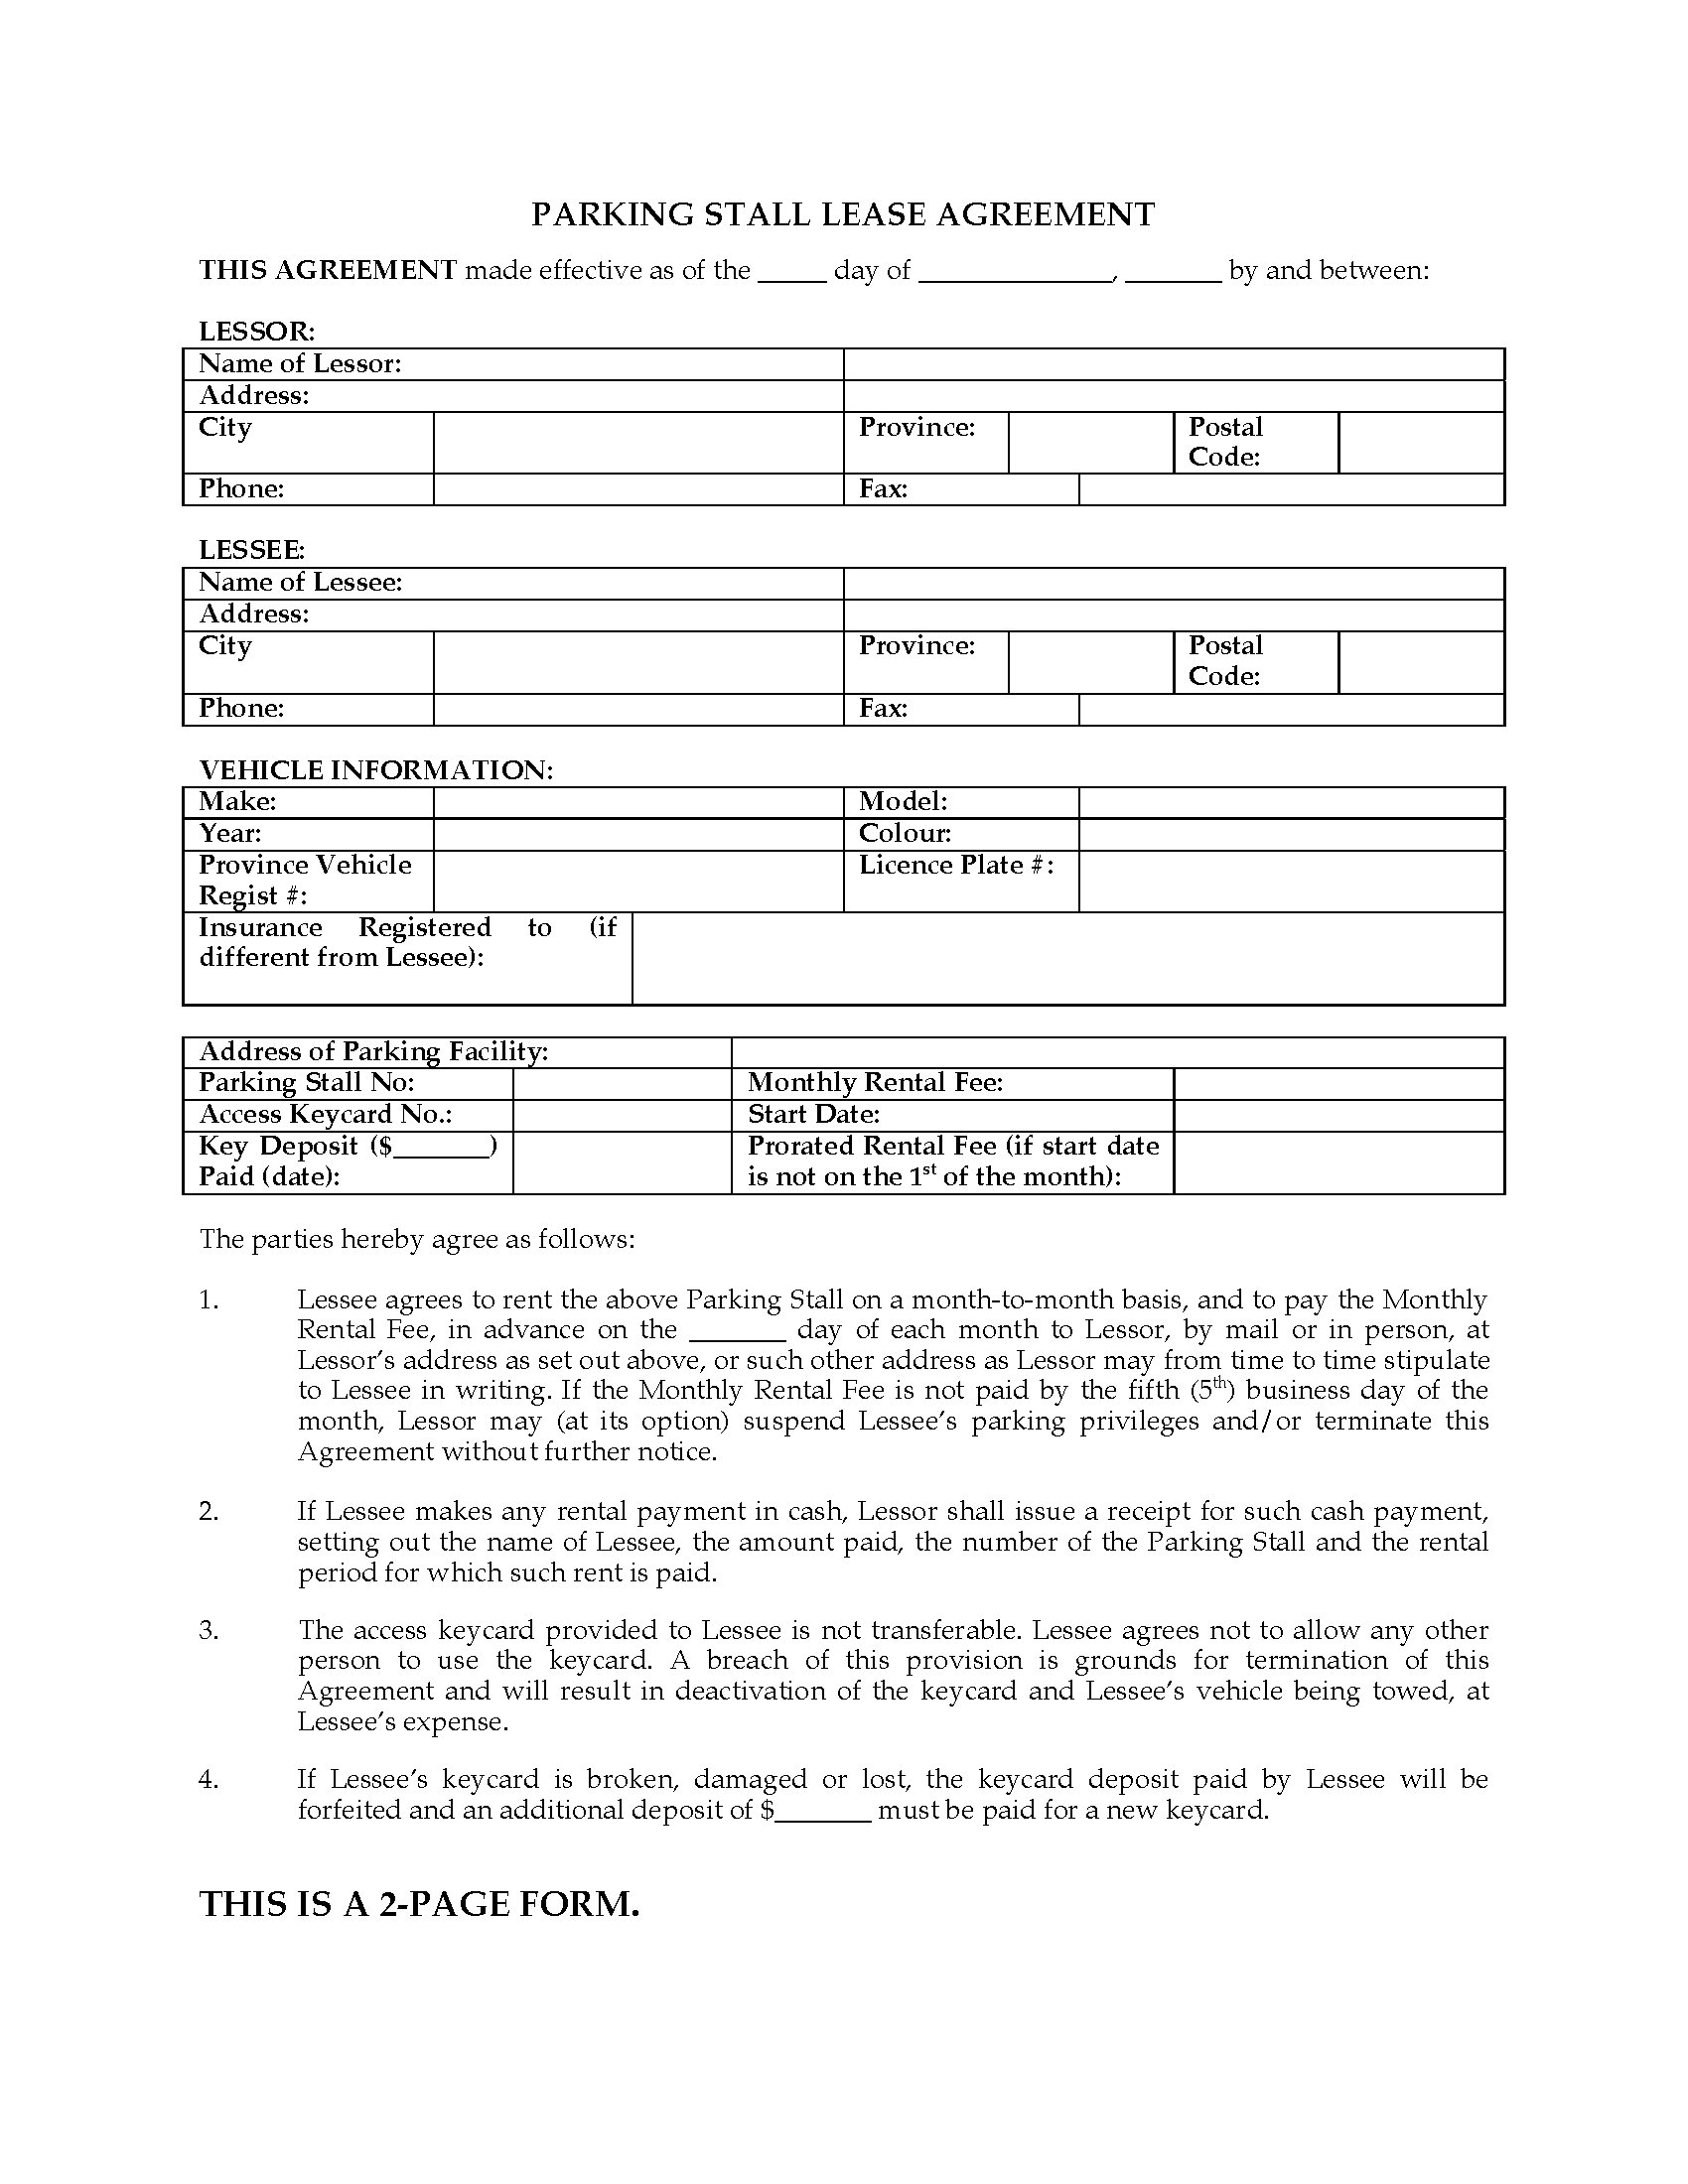 British Columbia Parking Stall Lease Form  Legal Forms 